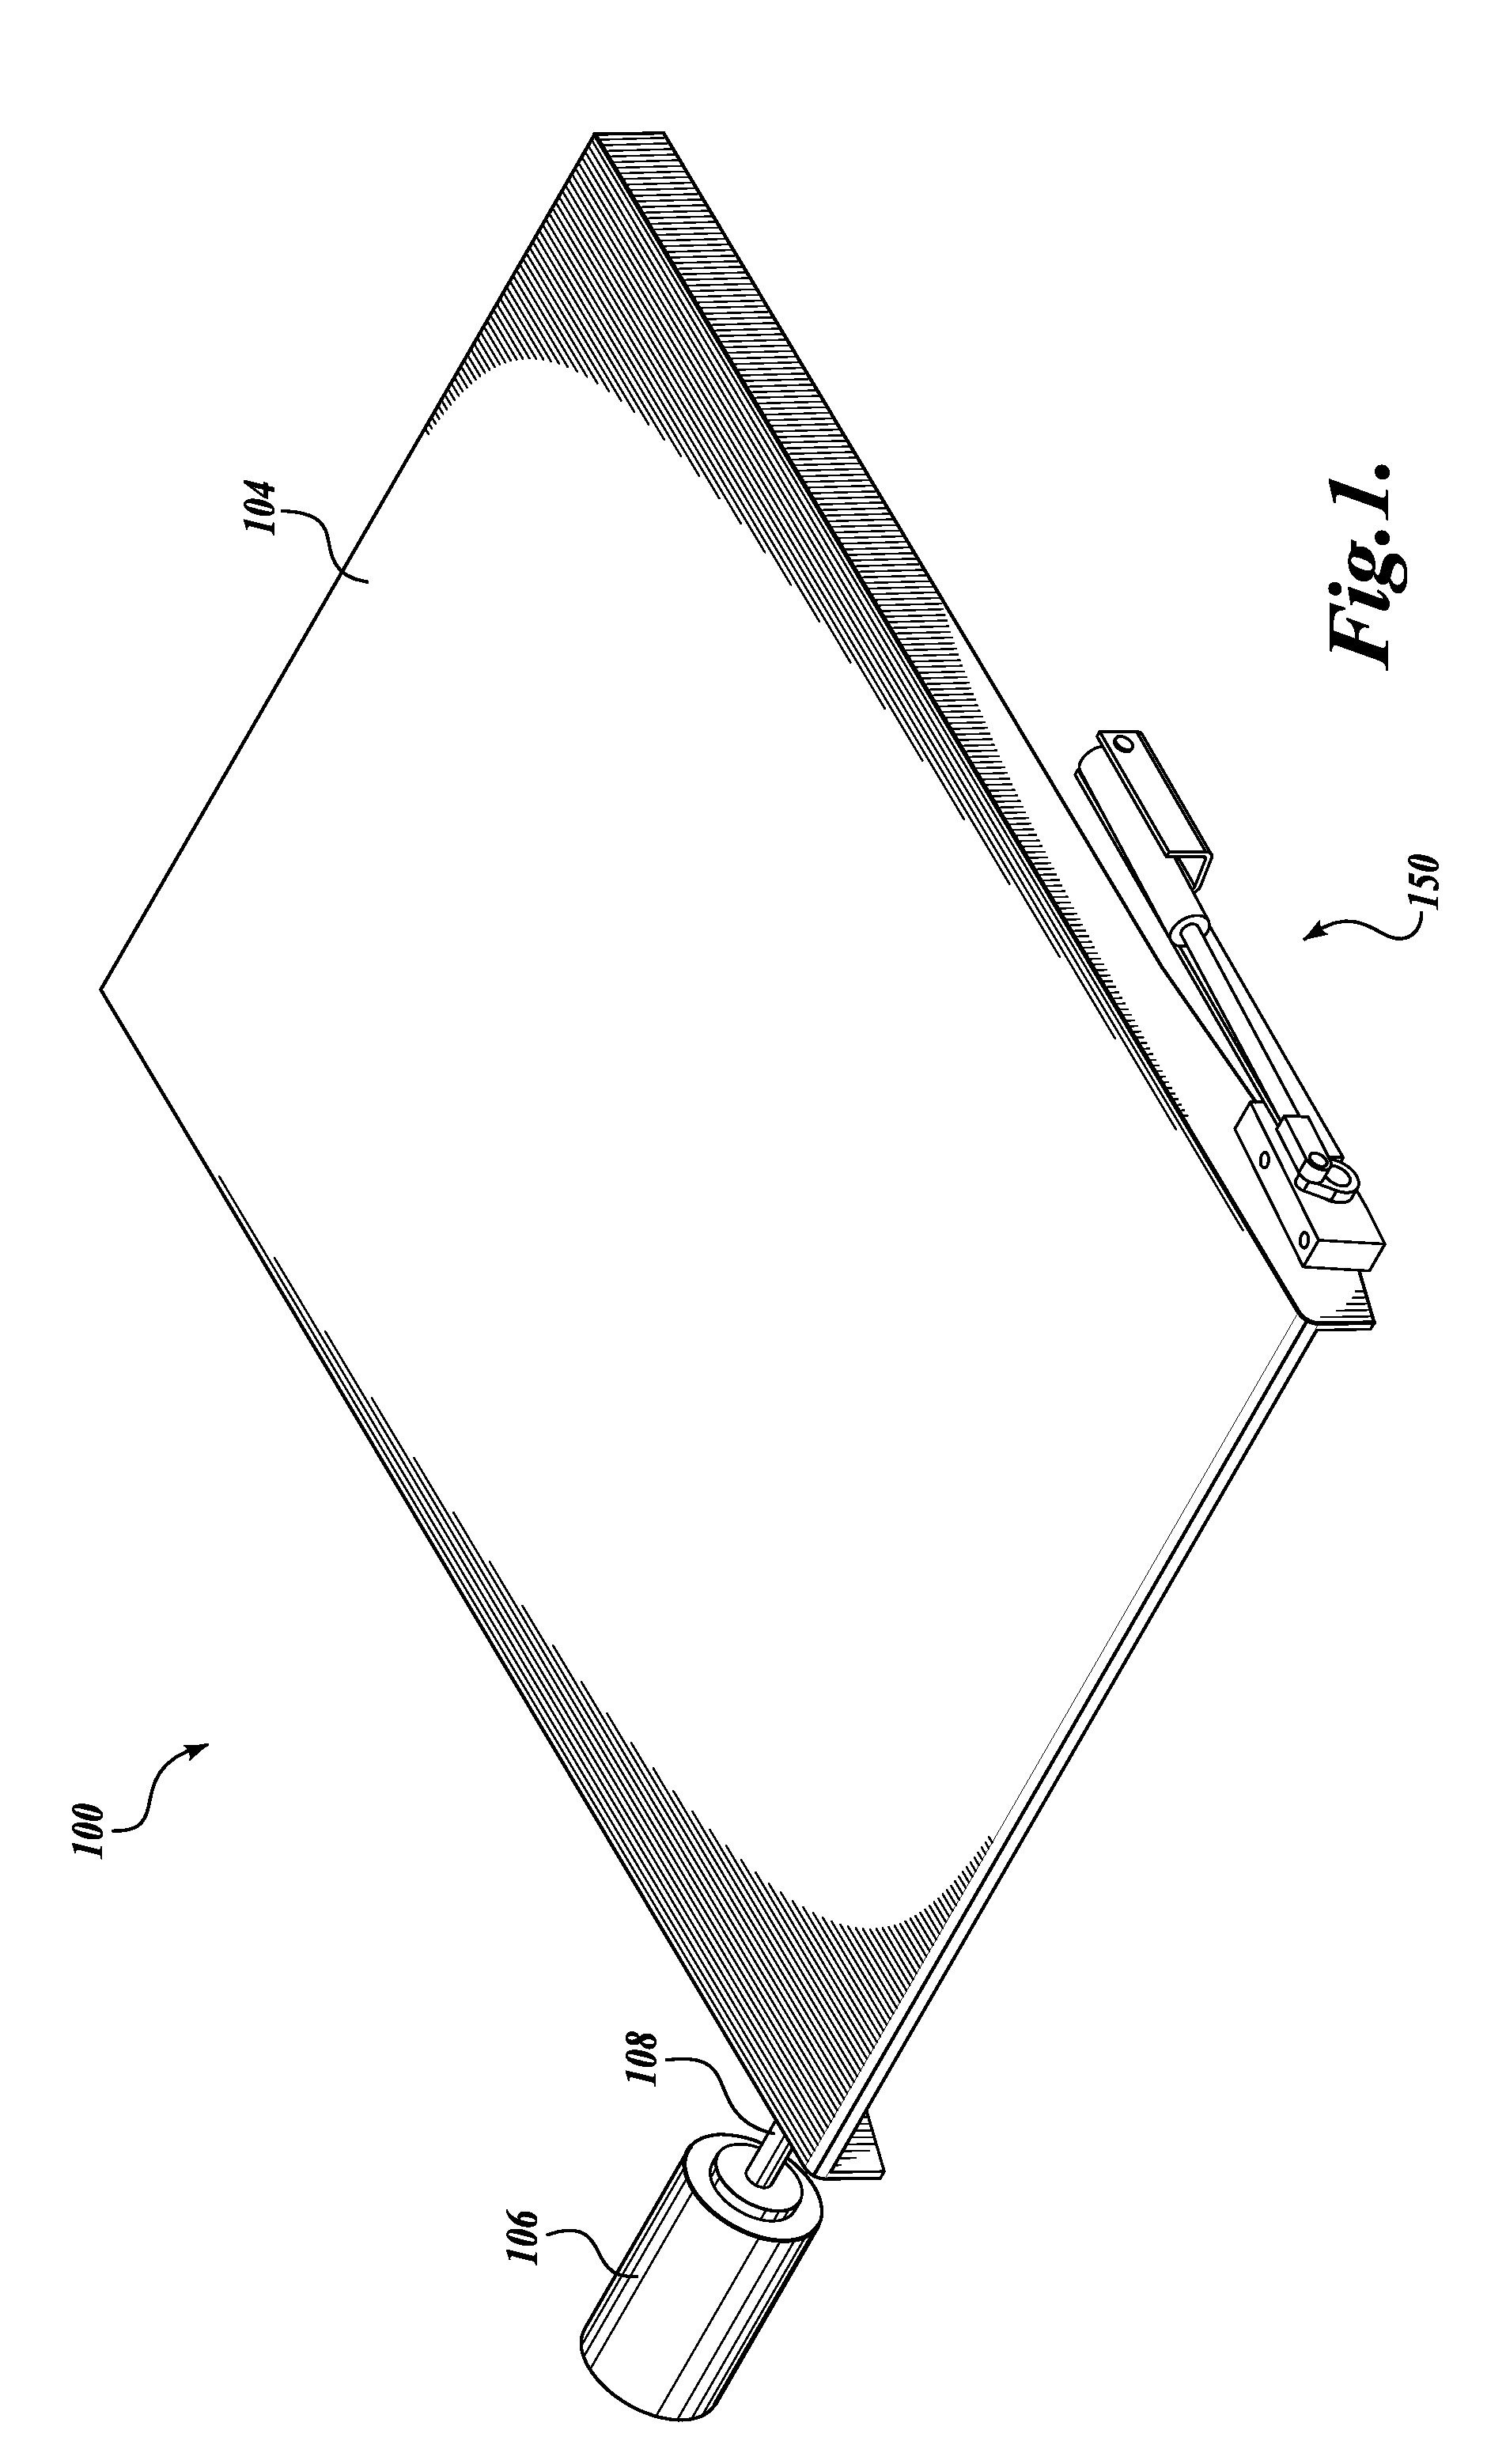 Counterbalance mechanism for fold out ramp